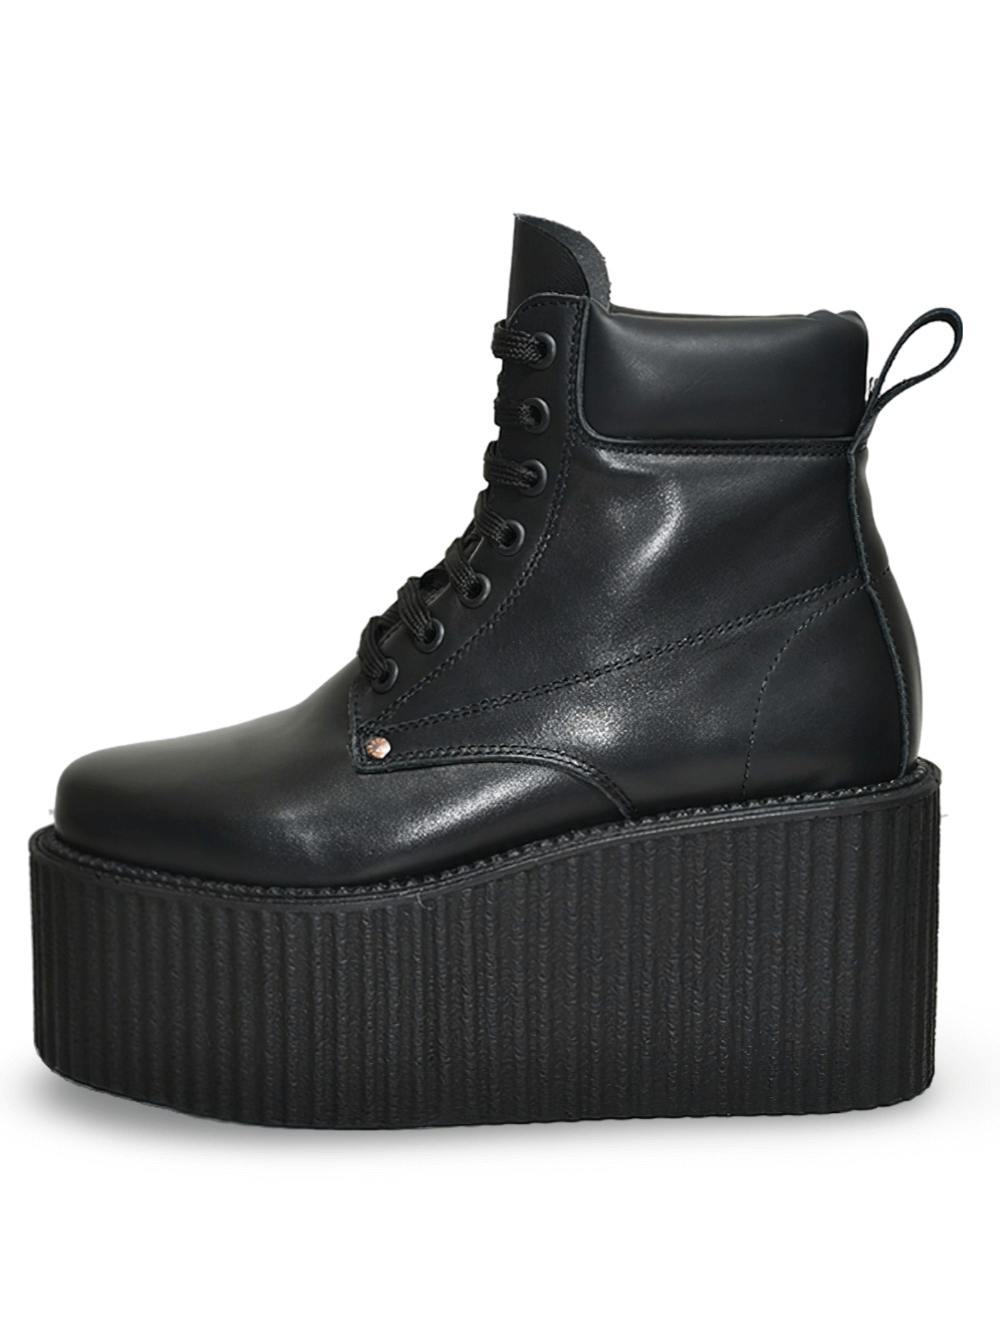 Black Creepers with Triple Rubber Sole 10cm Heel